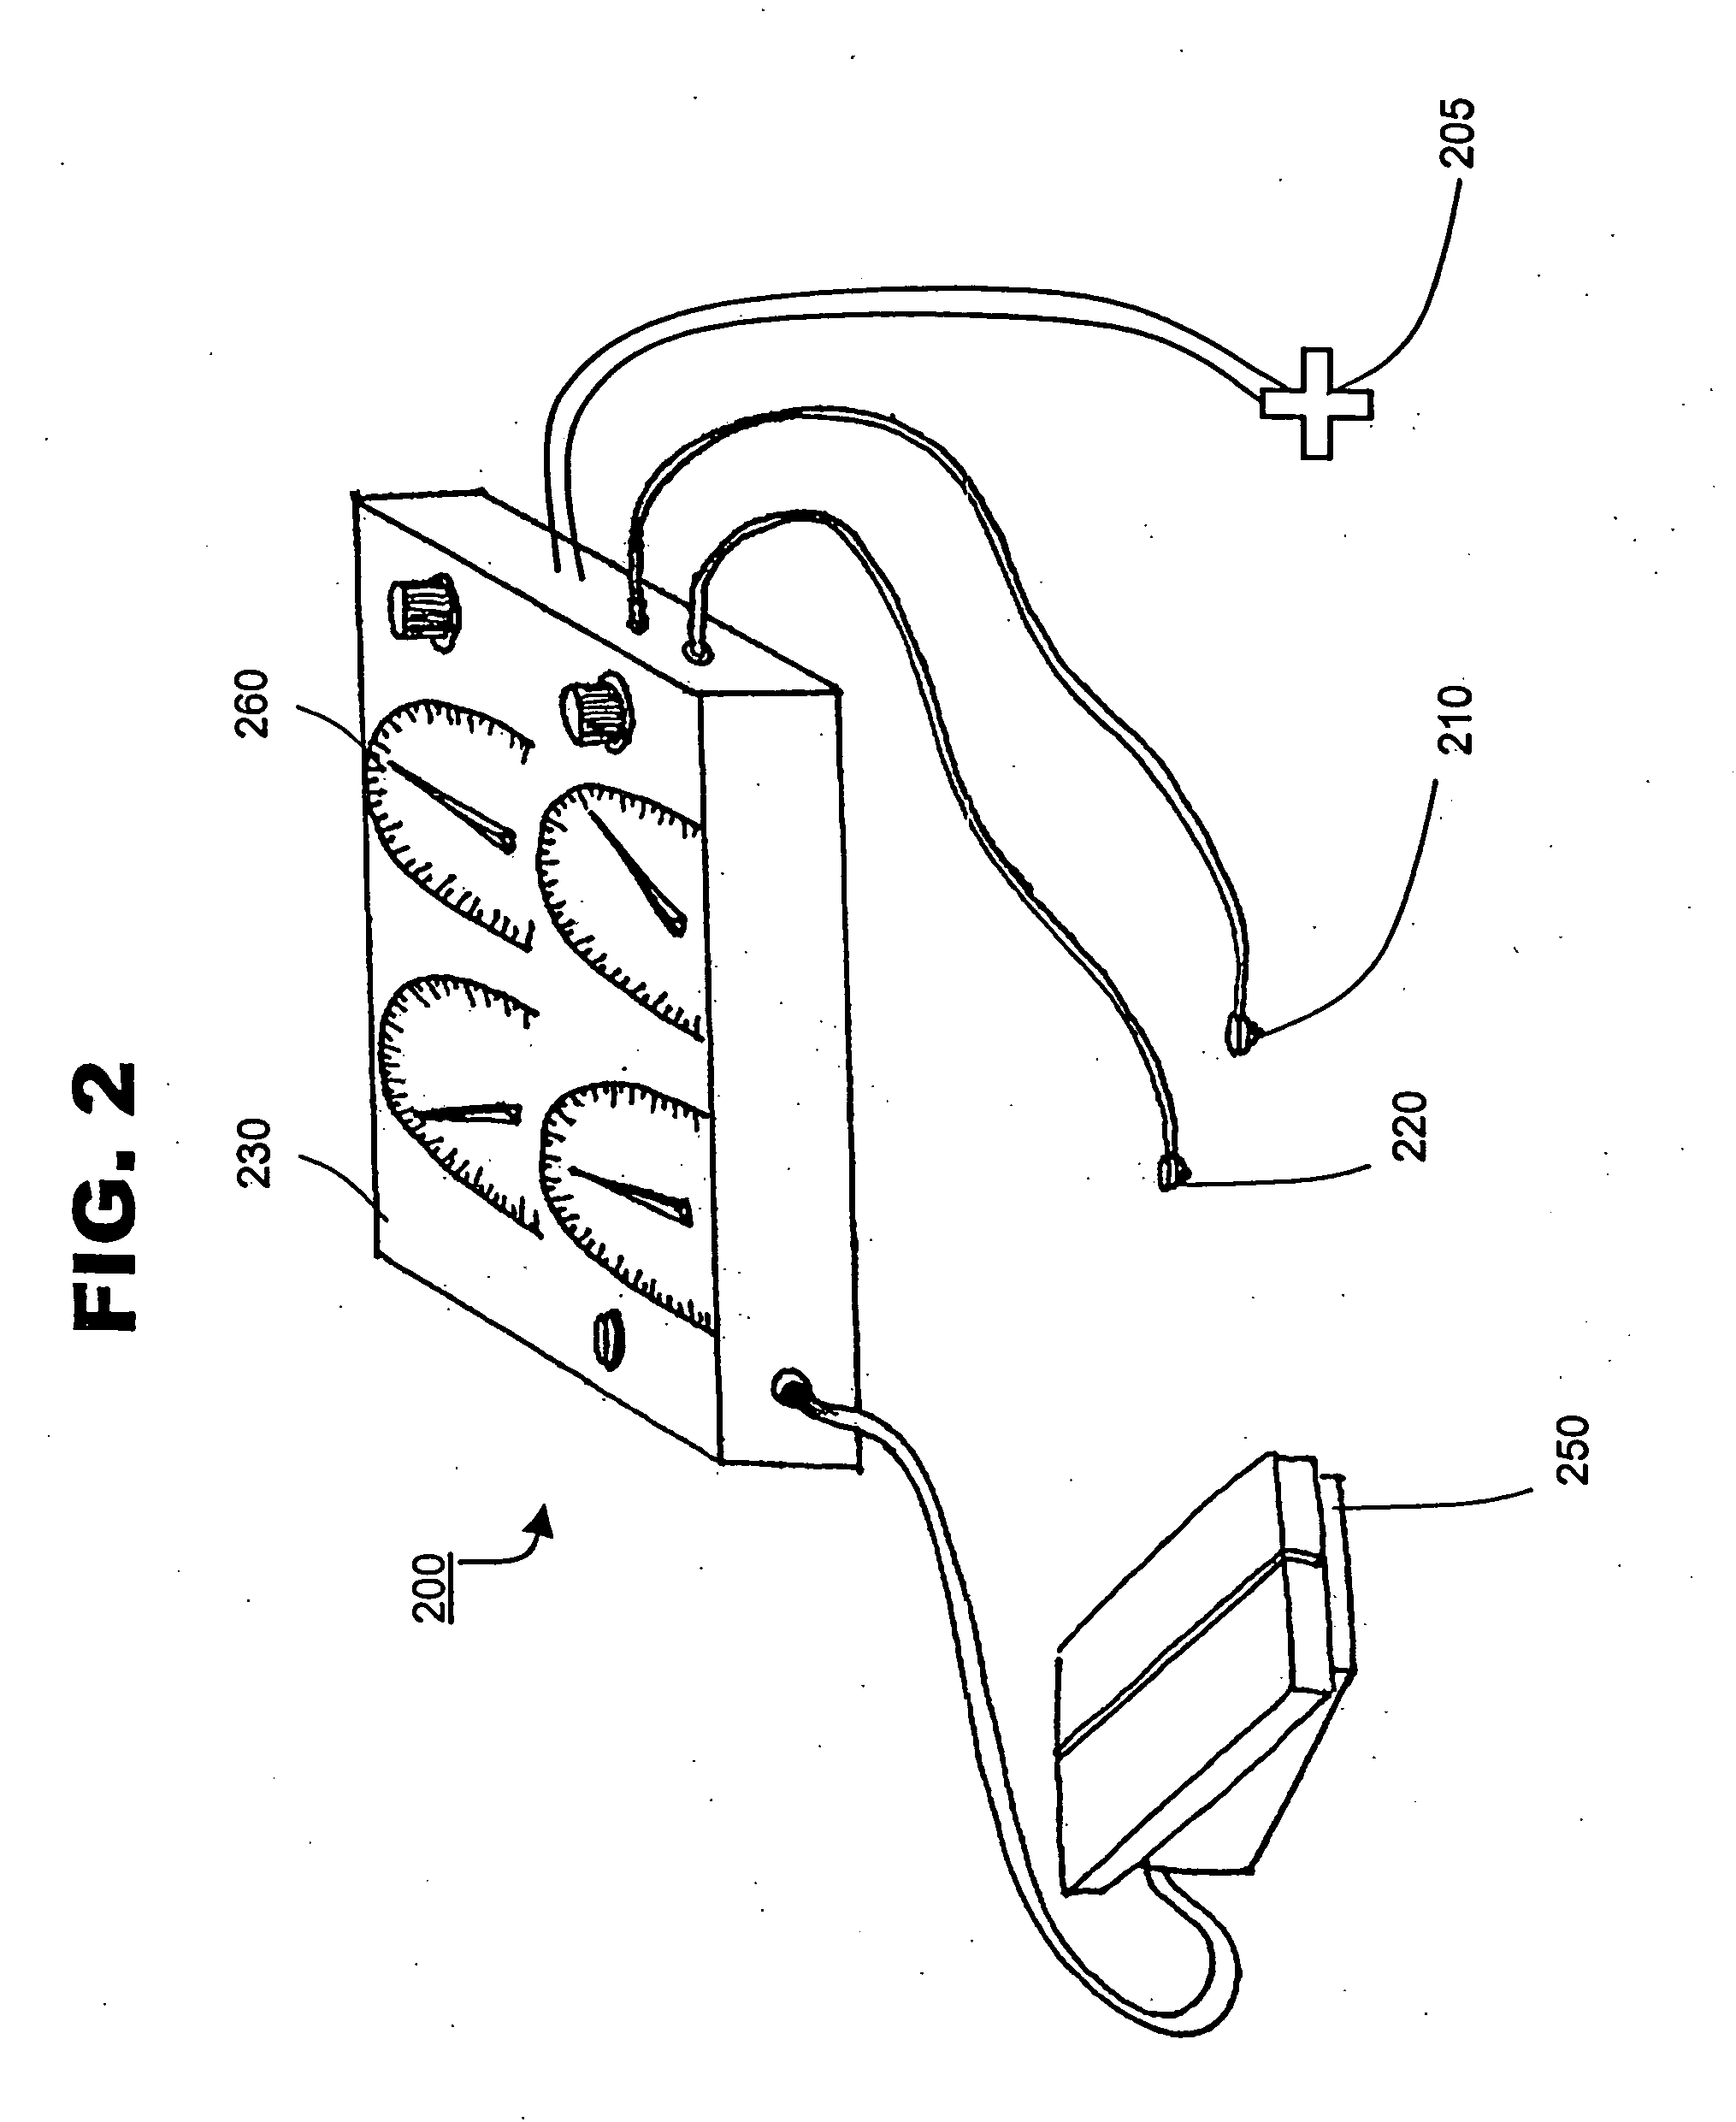 Method and system for monitoring and controlling systemic and pulmonary circulation during a medical procedure